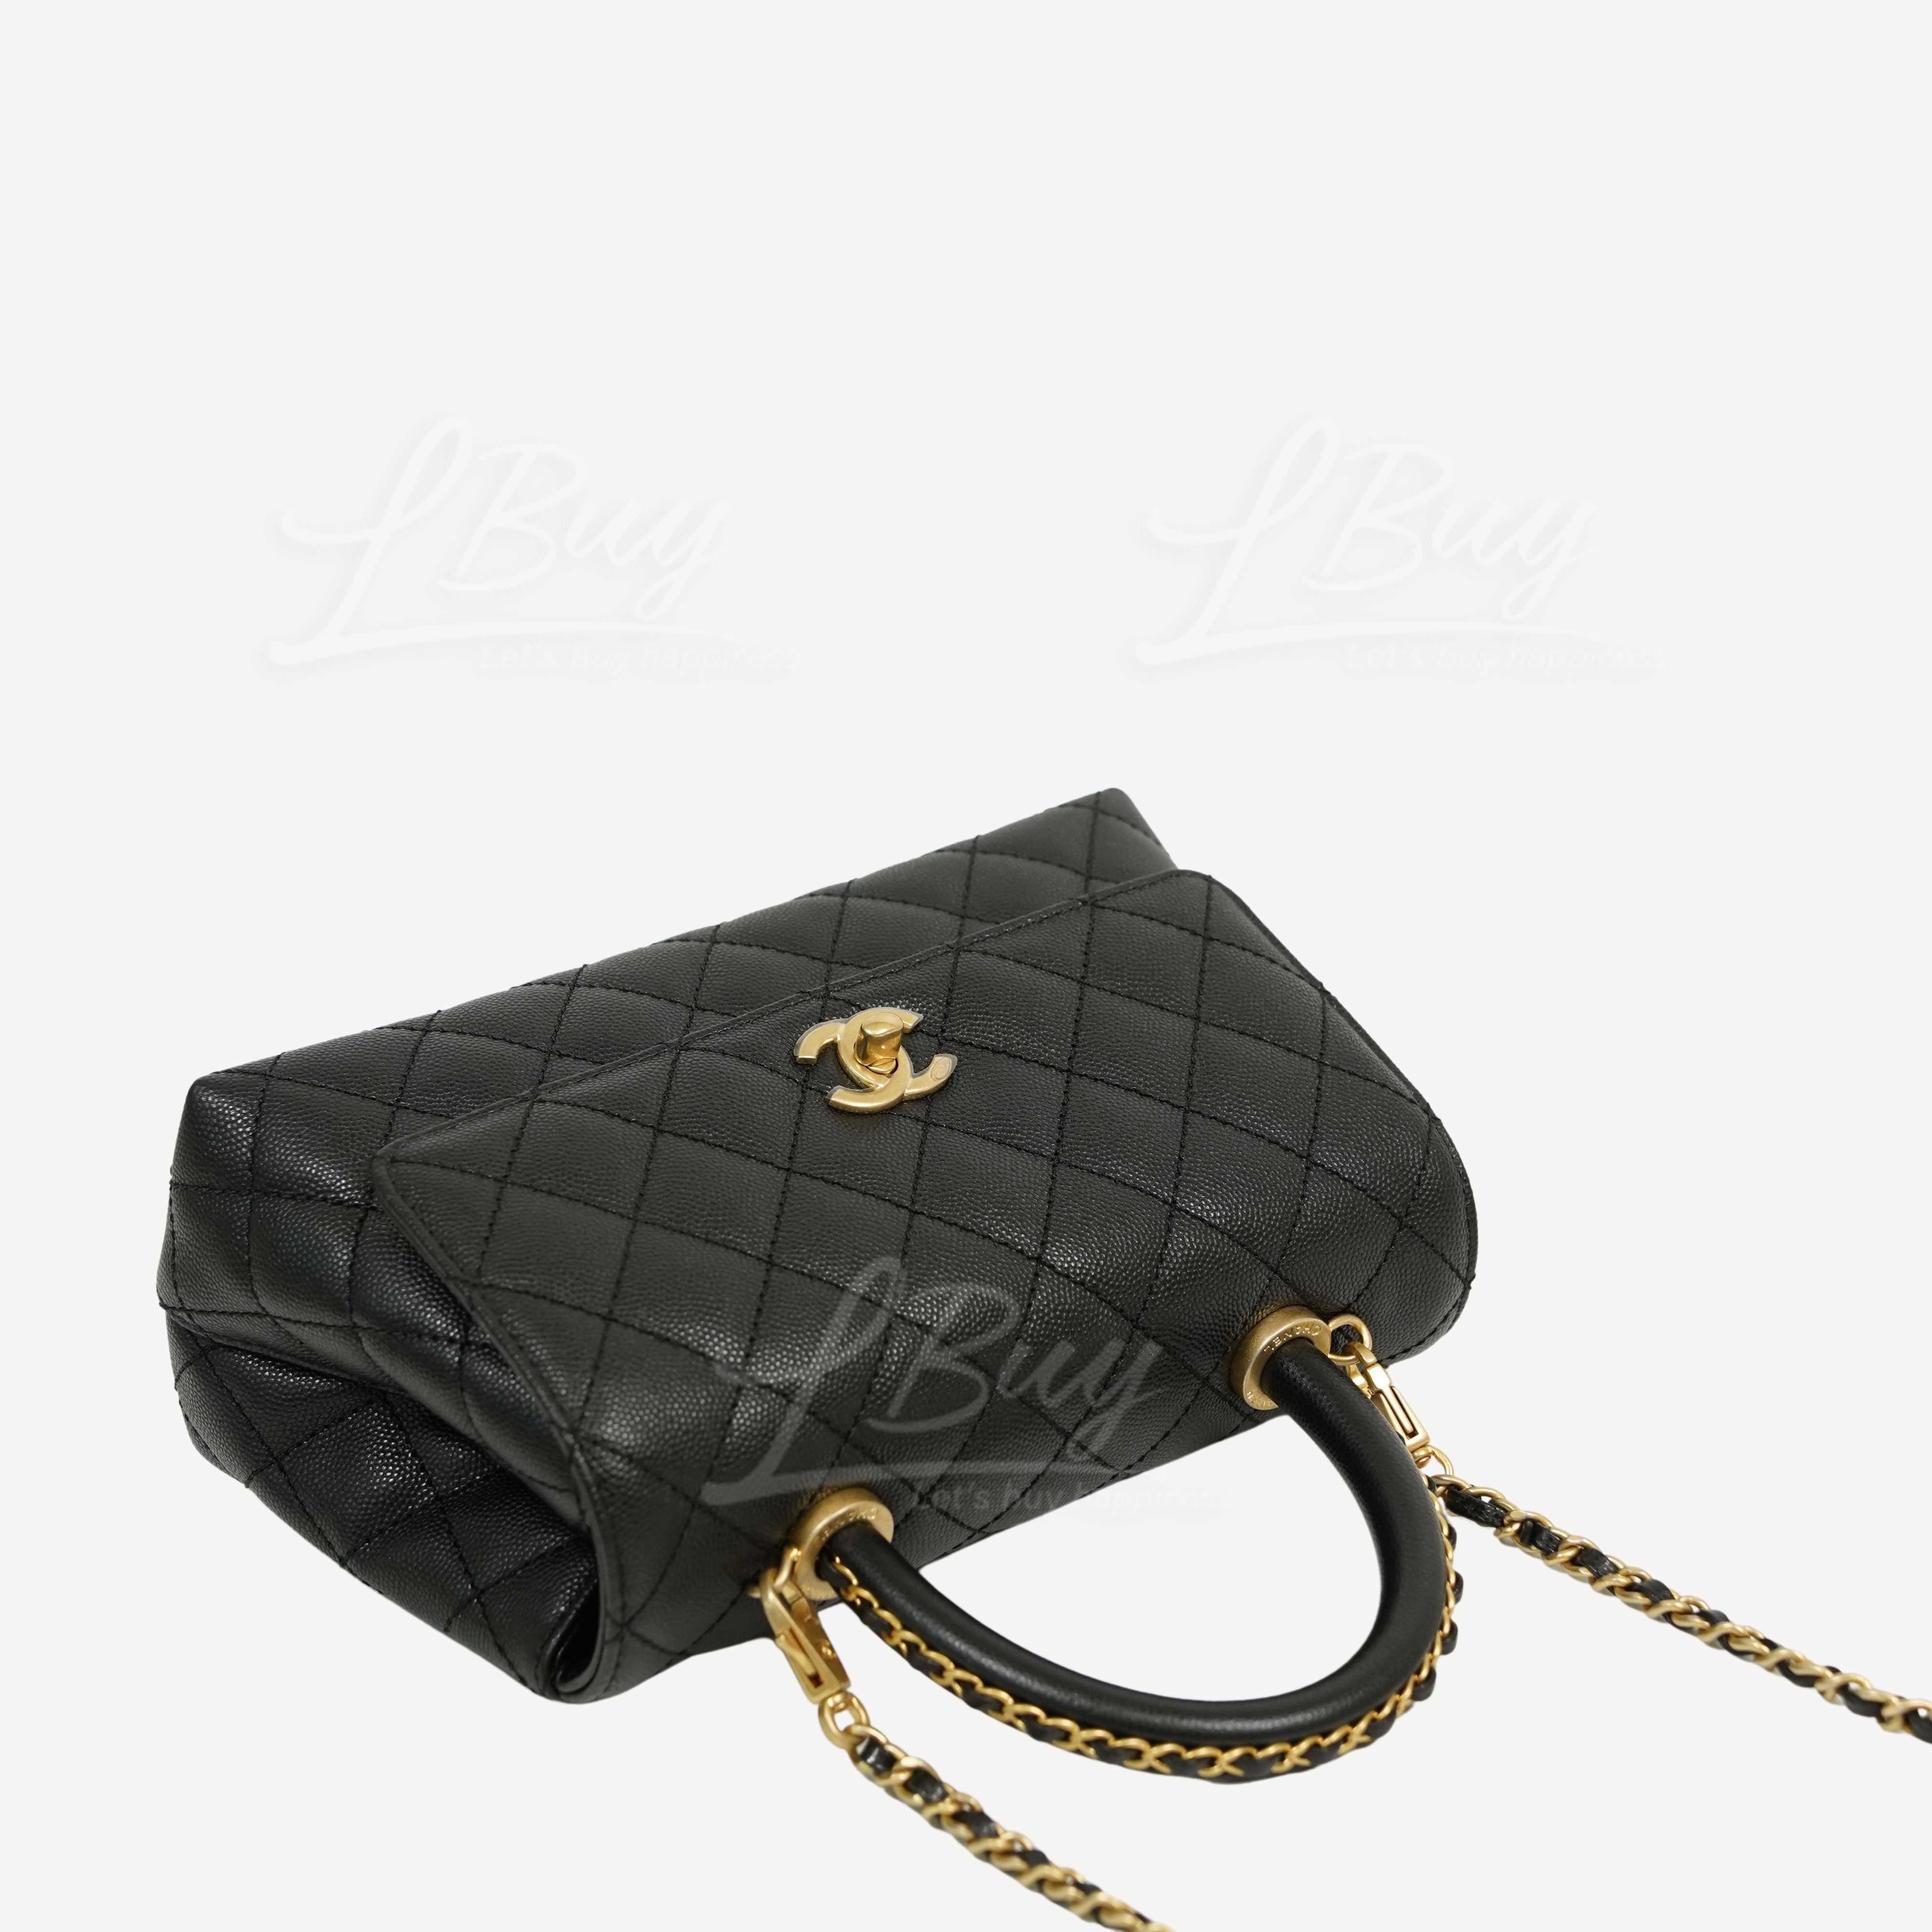 Chanel Coco Grained Calfskin Flap Bag with Lizard Handle A92990 At Cheap  Price.